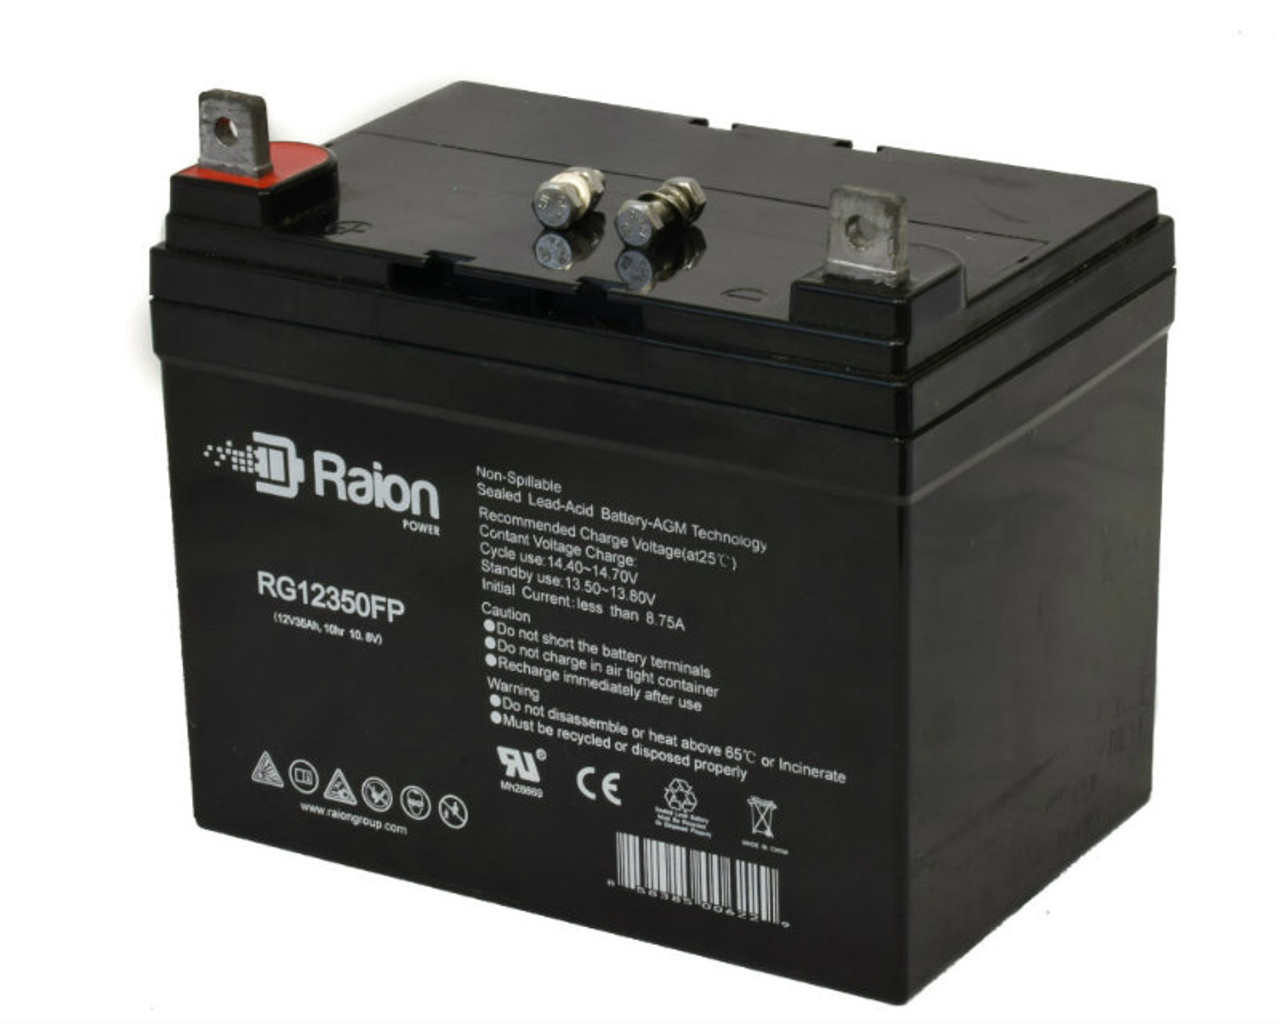 Raion Power Replacement 12V 35Ah Battery for BB BC35-12F - 1 Pack